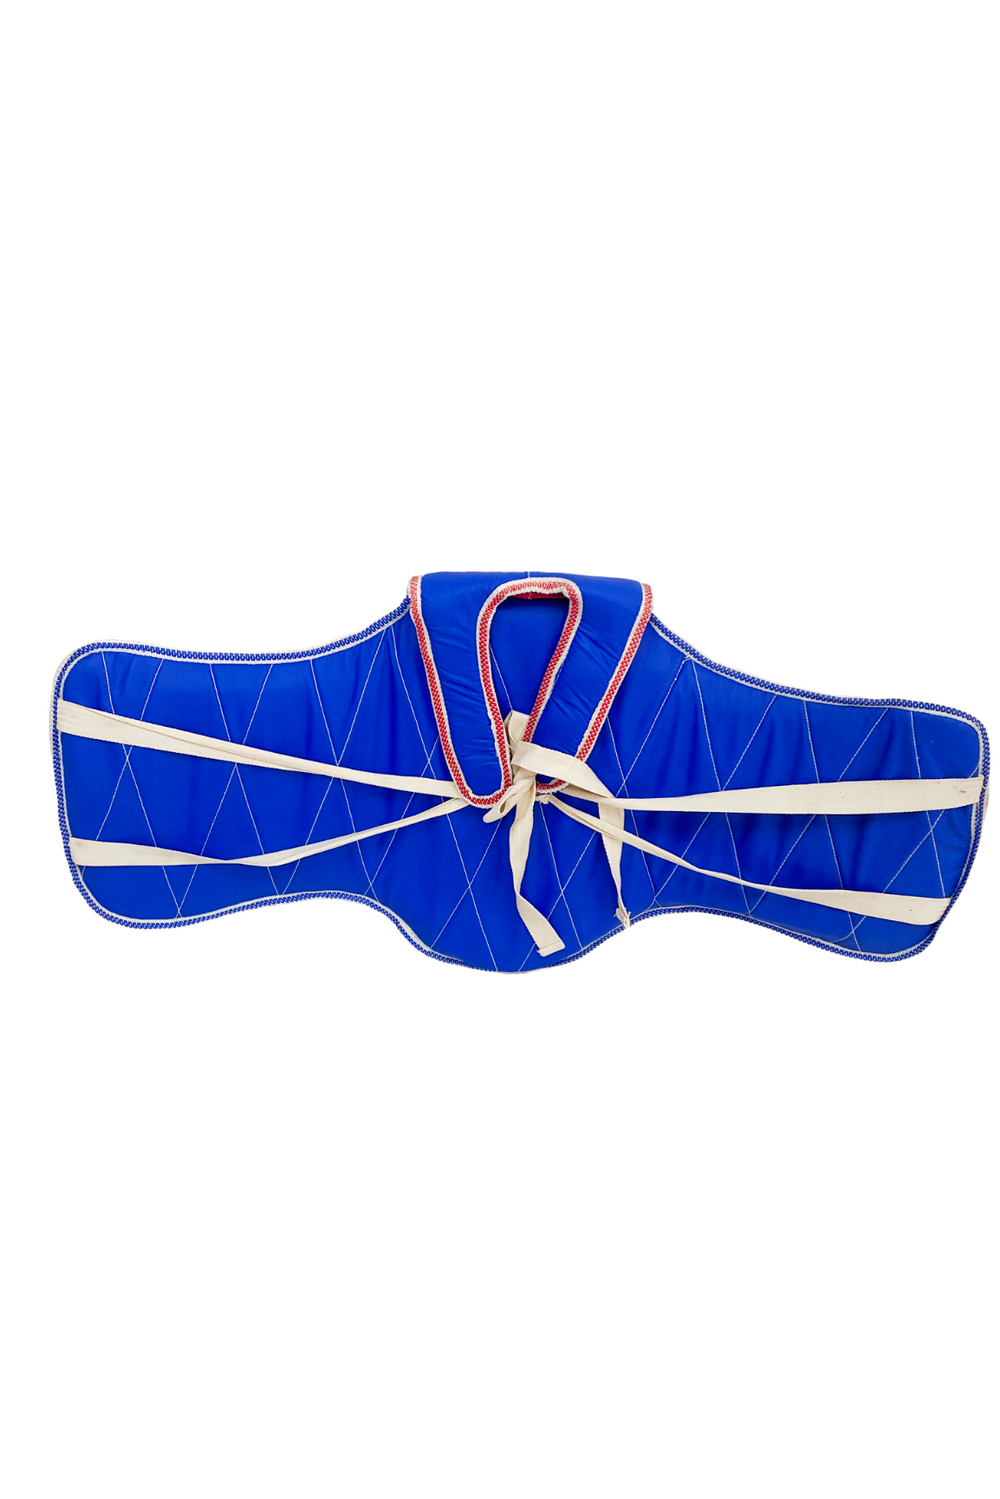 blue boxing shield with cream ropes